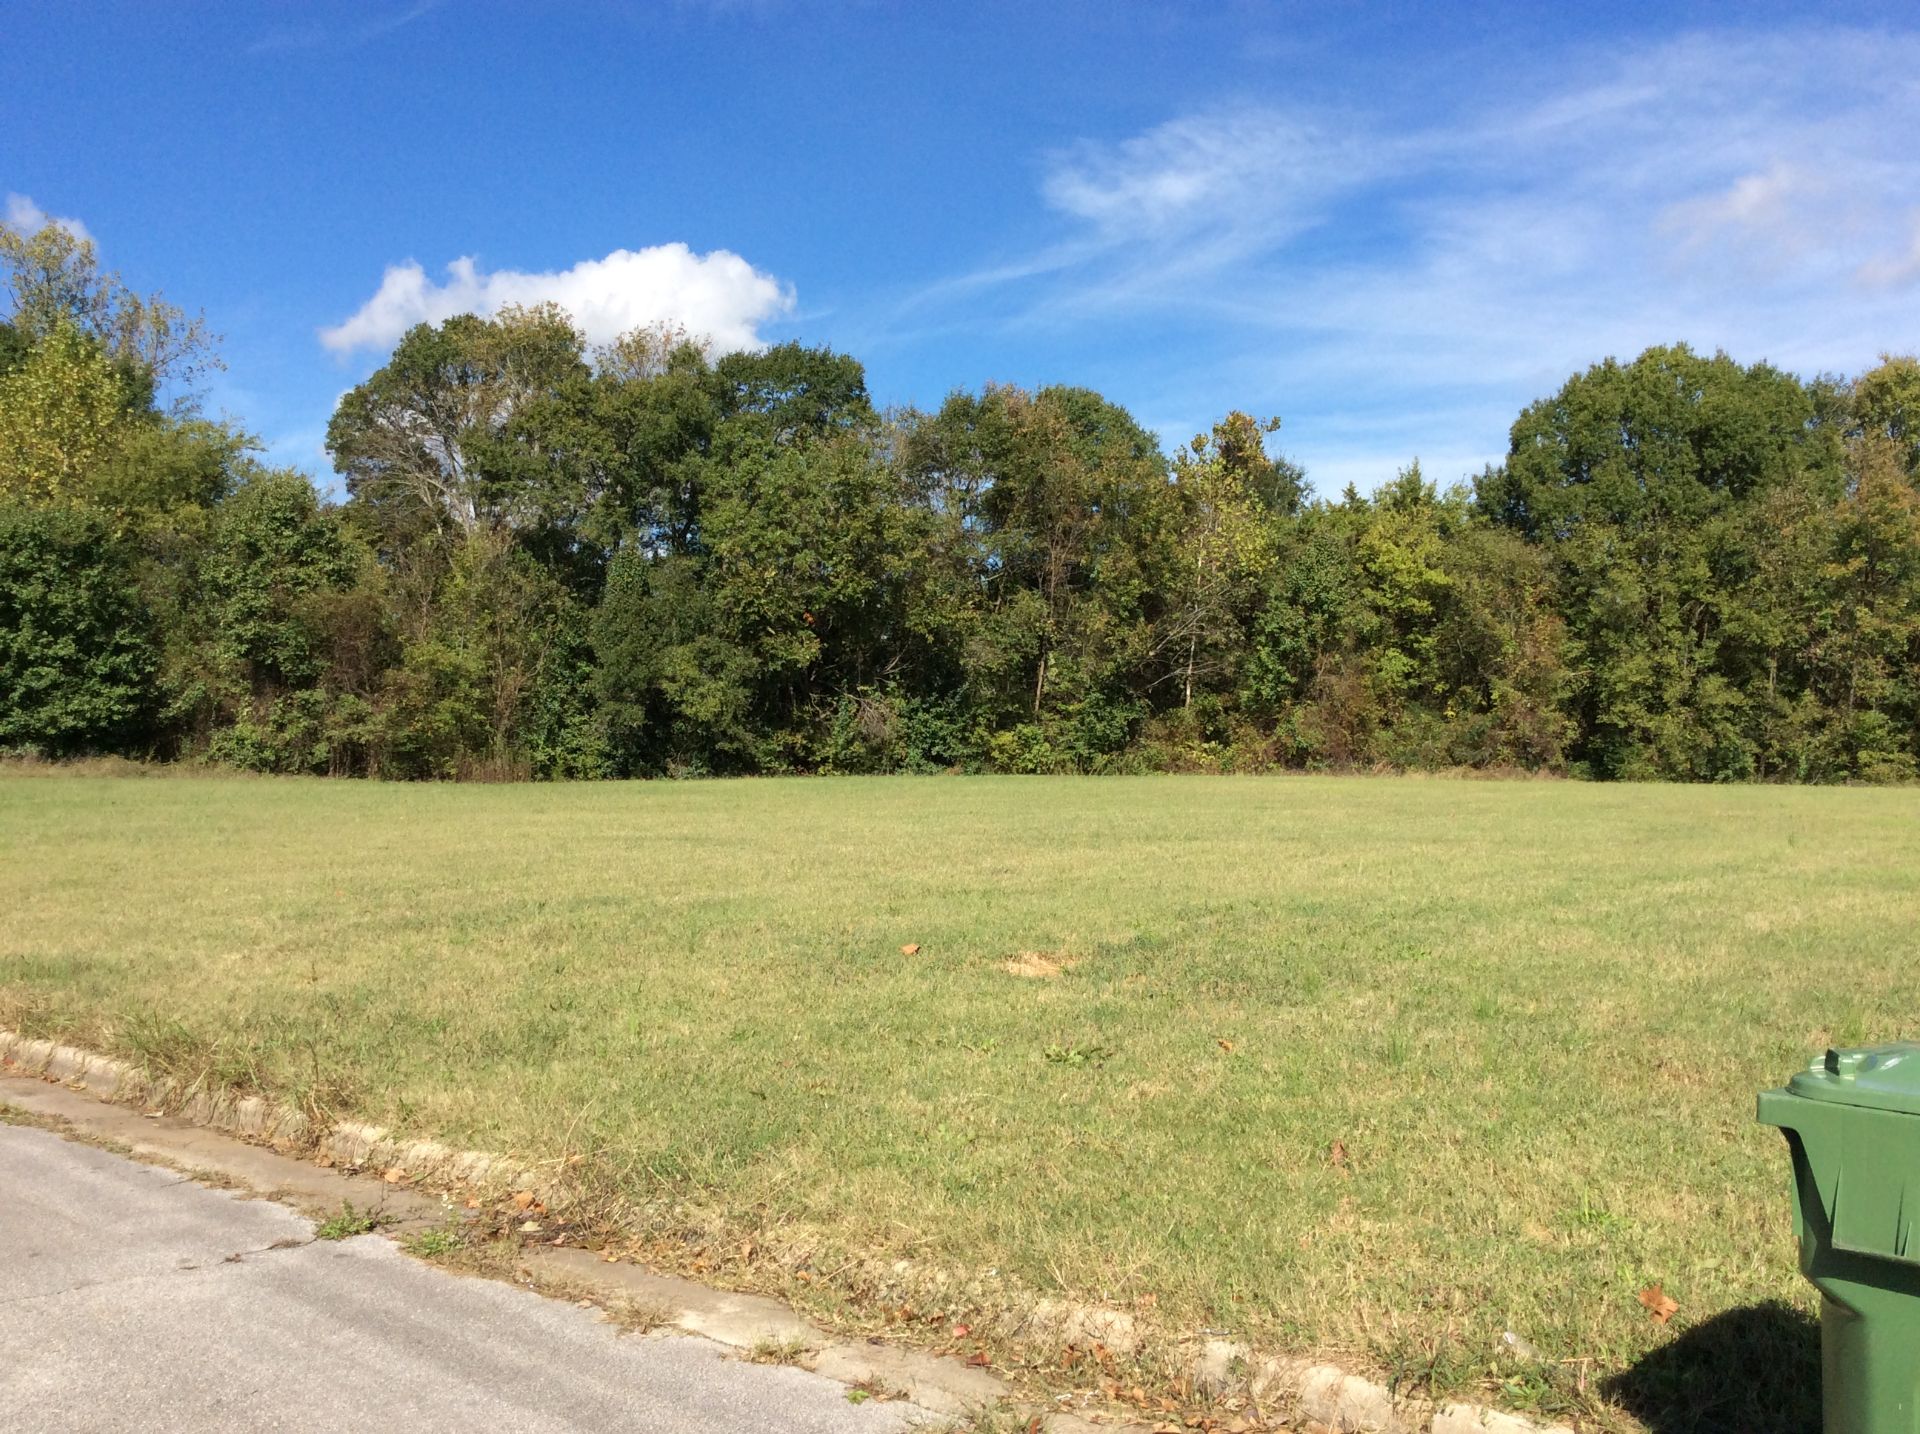 6 Acres± Commerical Lot - Hemingway Drive Decatur, Alabama.  The property is currently zoned R-6. - Image 5 of 7